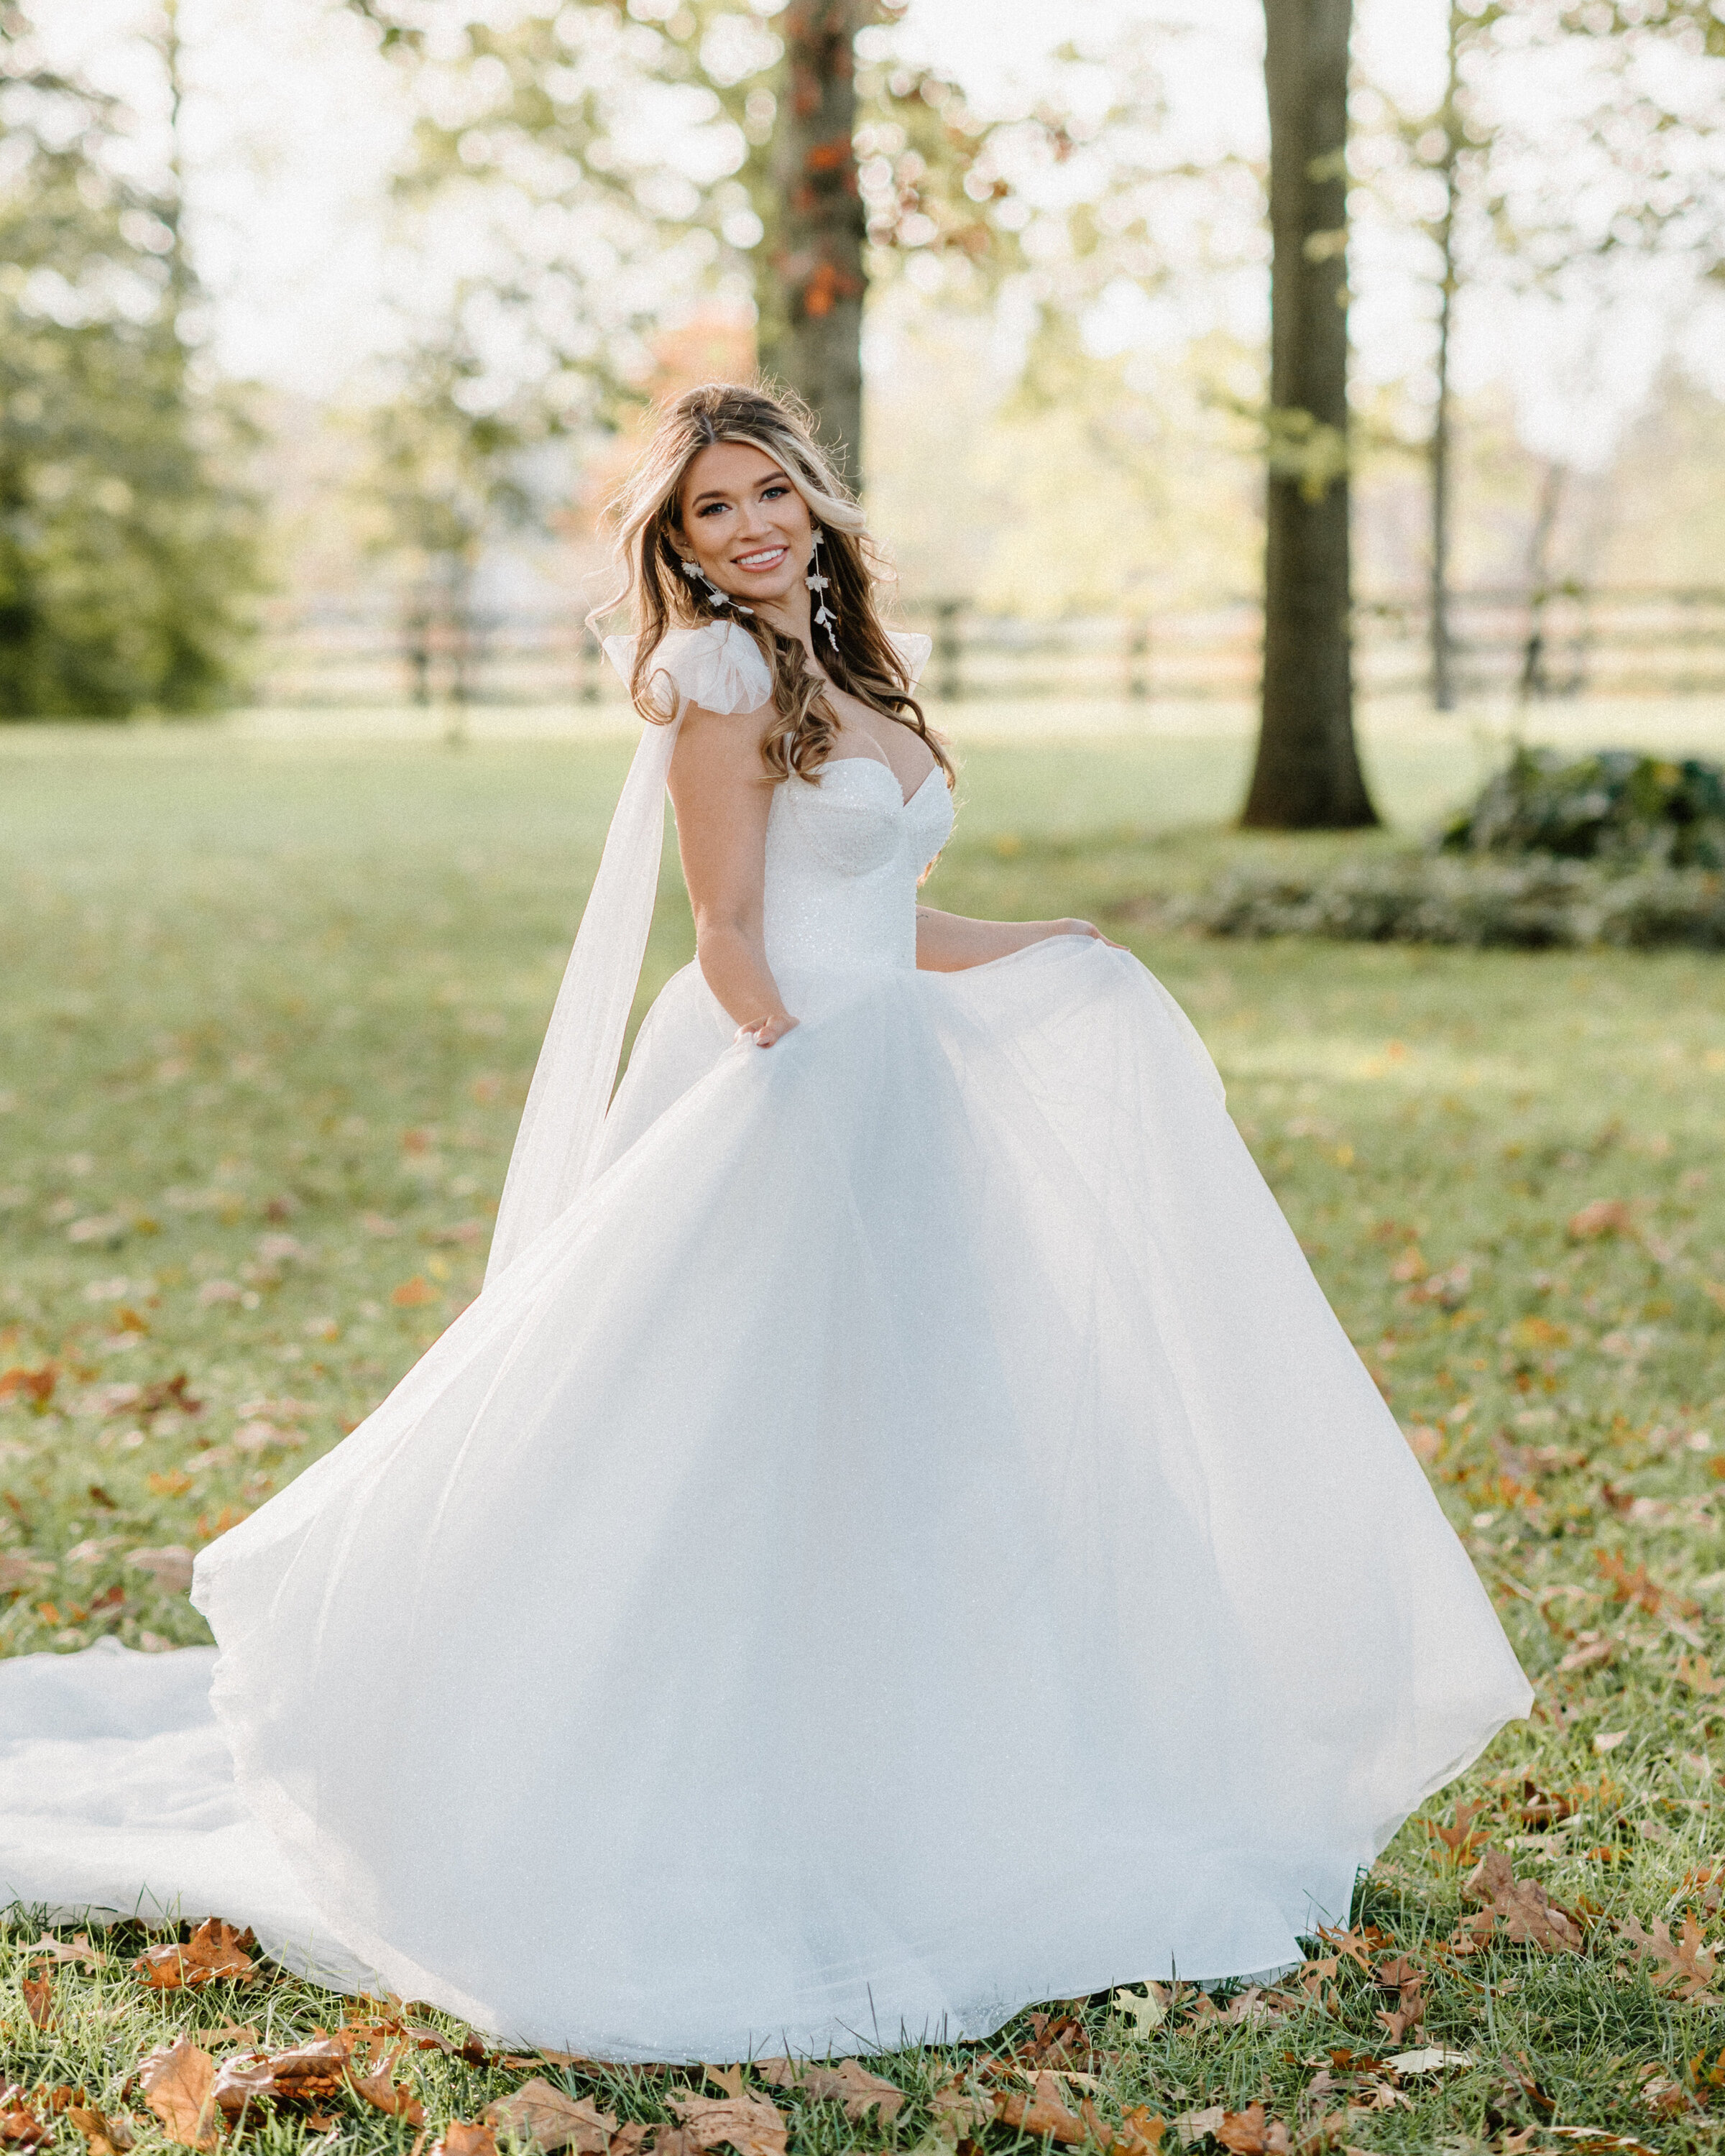 Bride twirling in gown